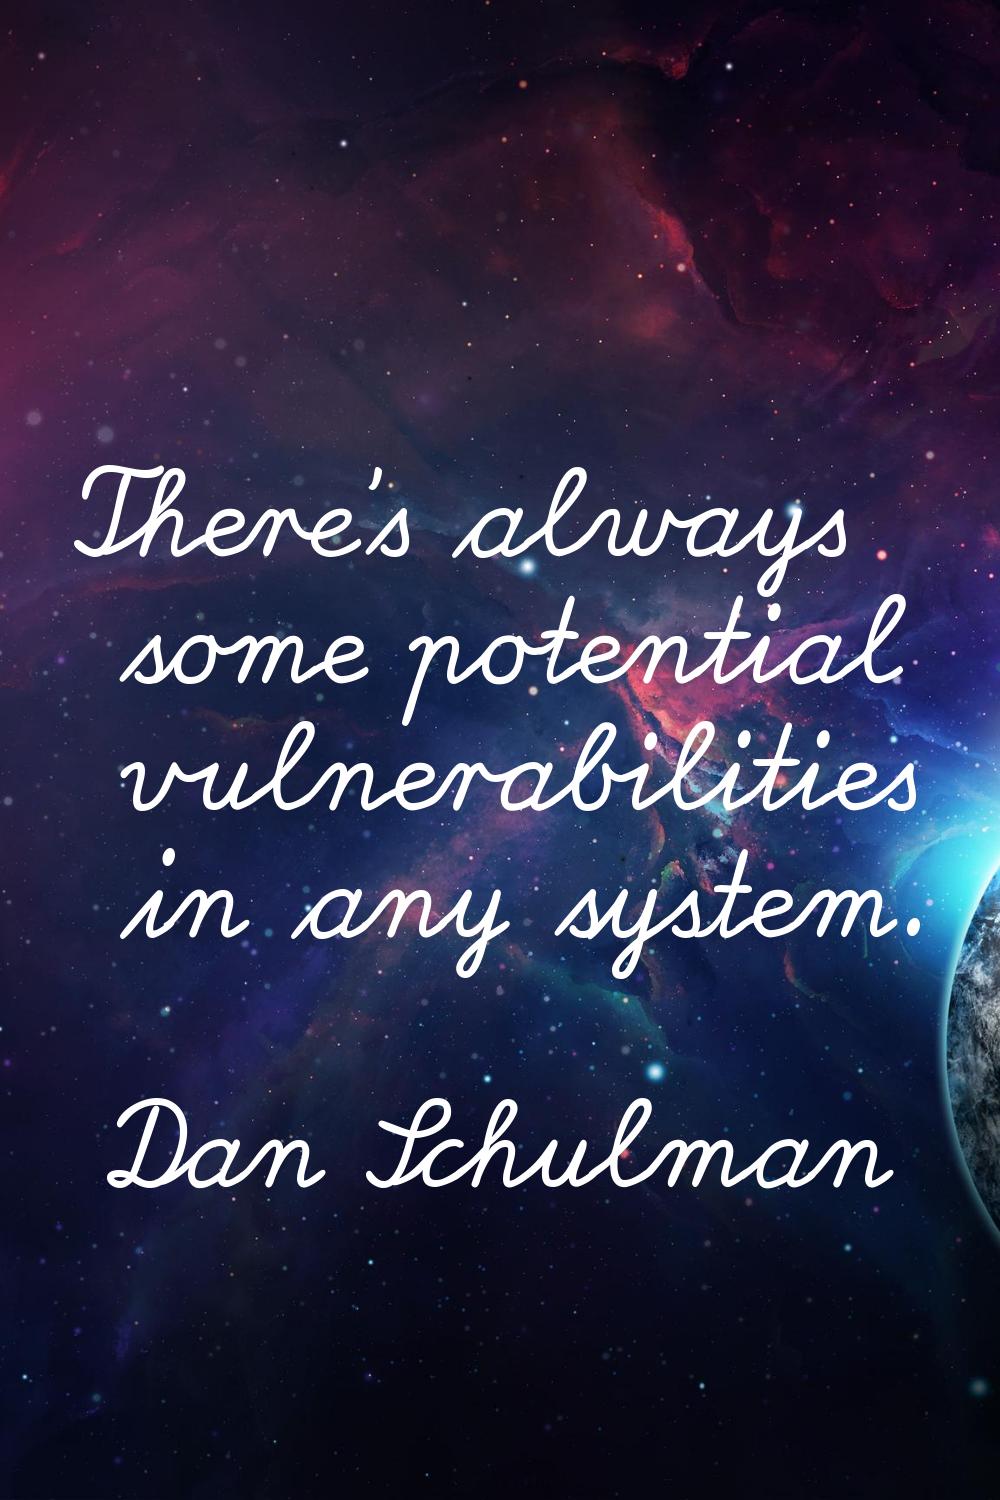 There's always some potential vulnerabilities in any system.